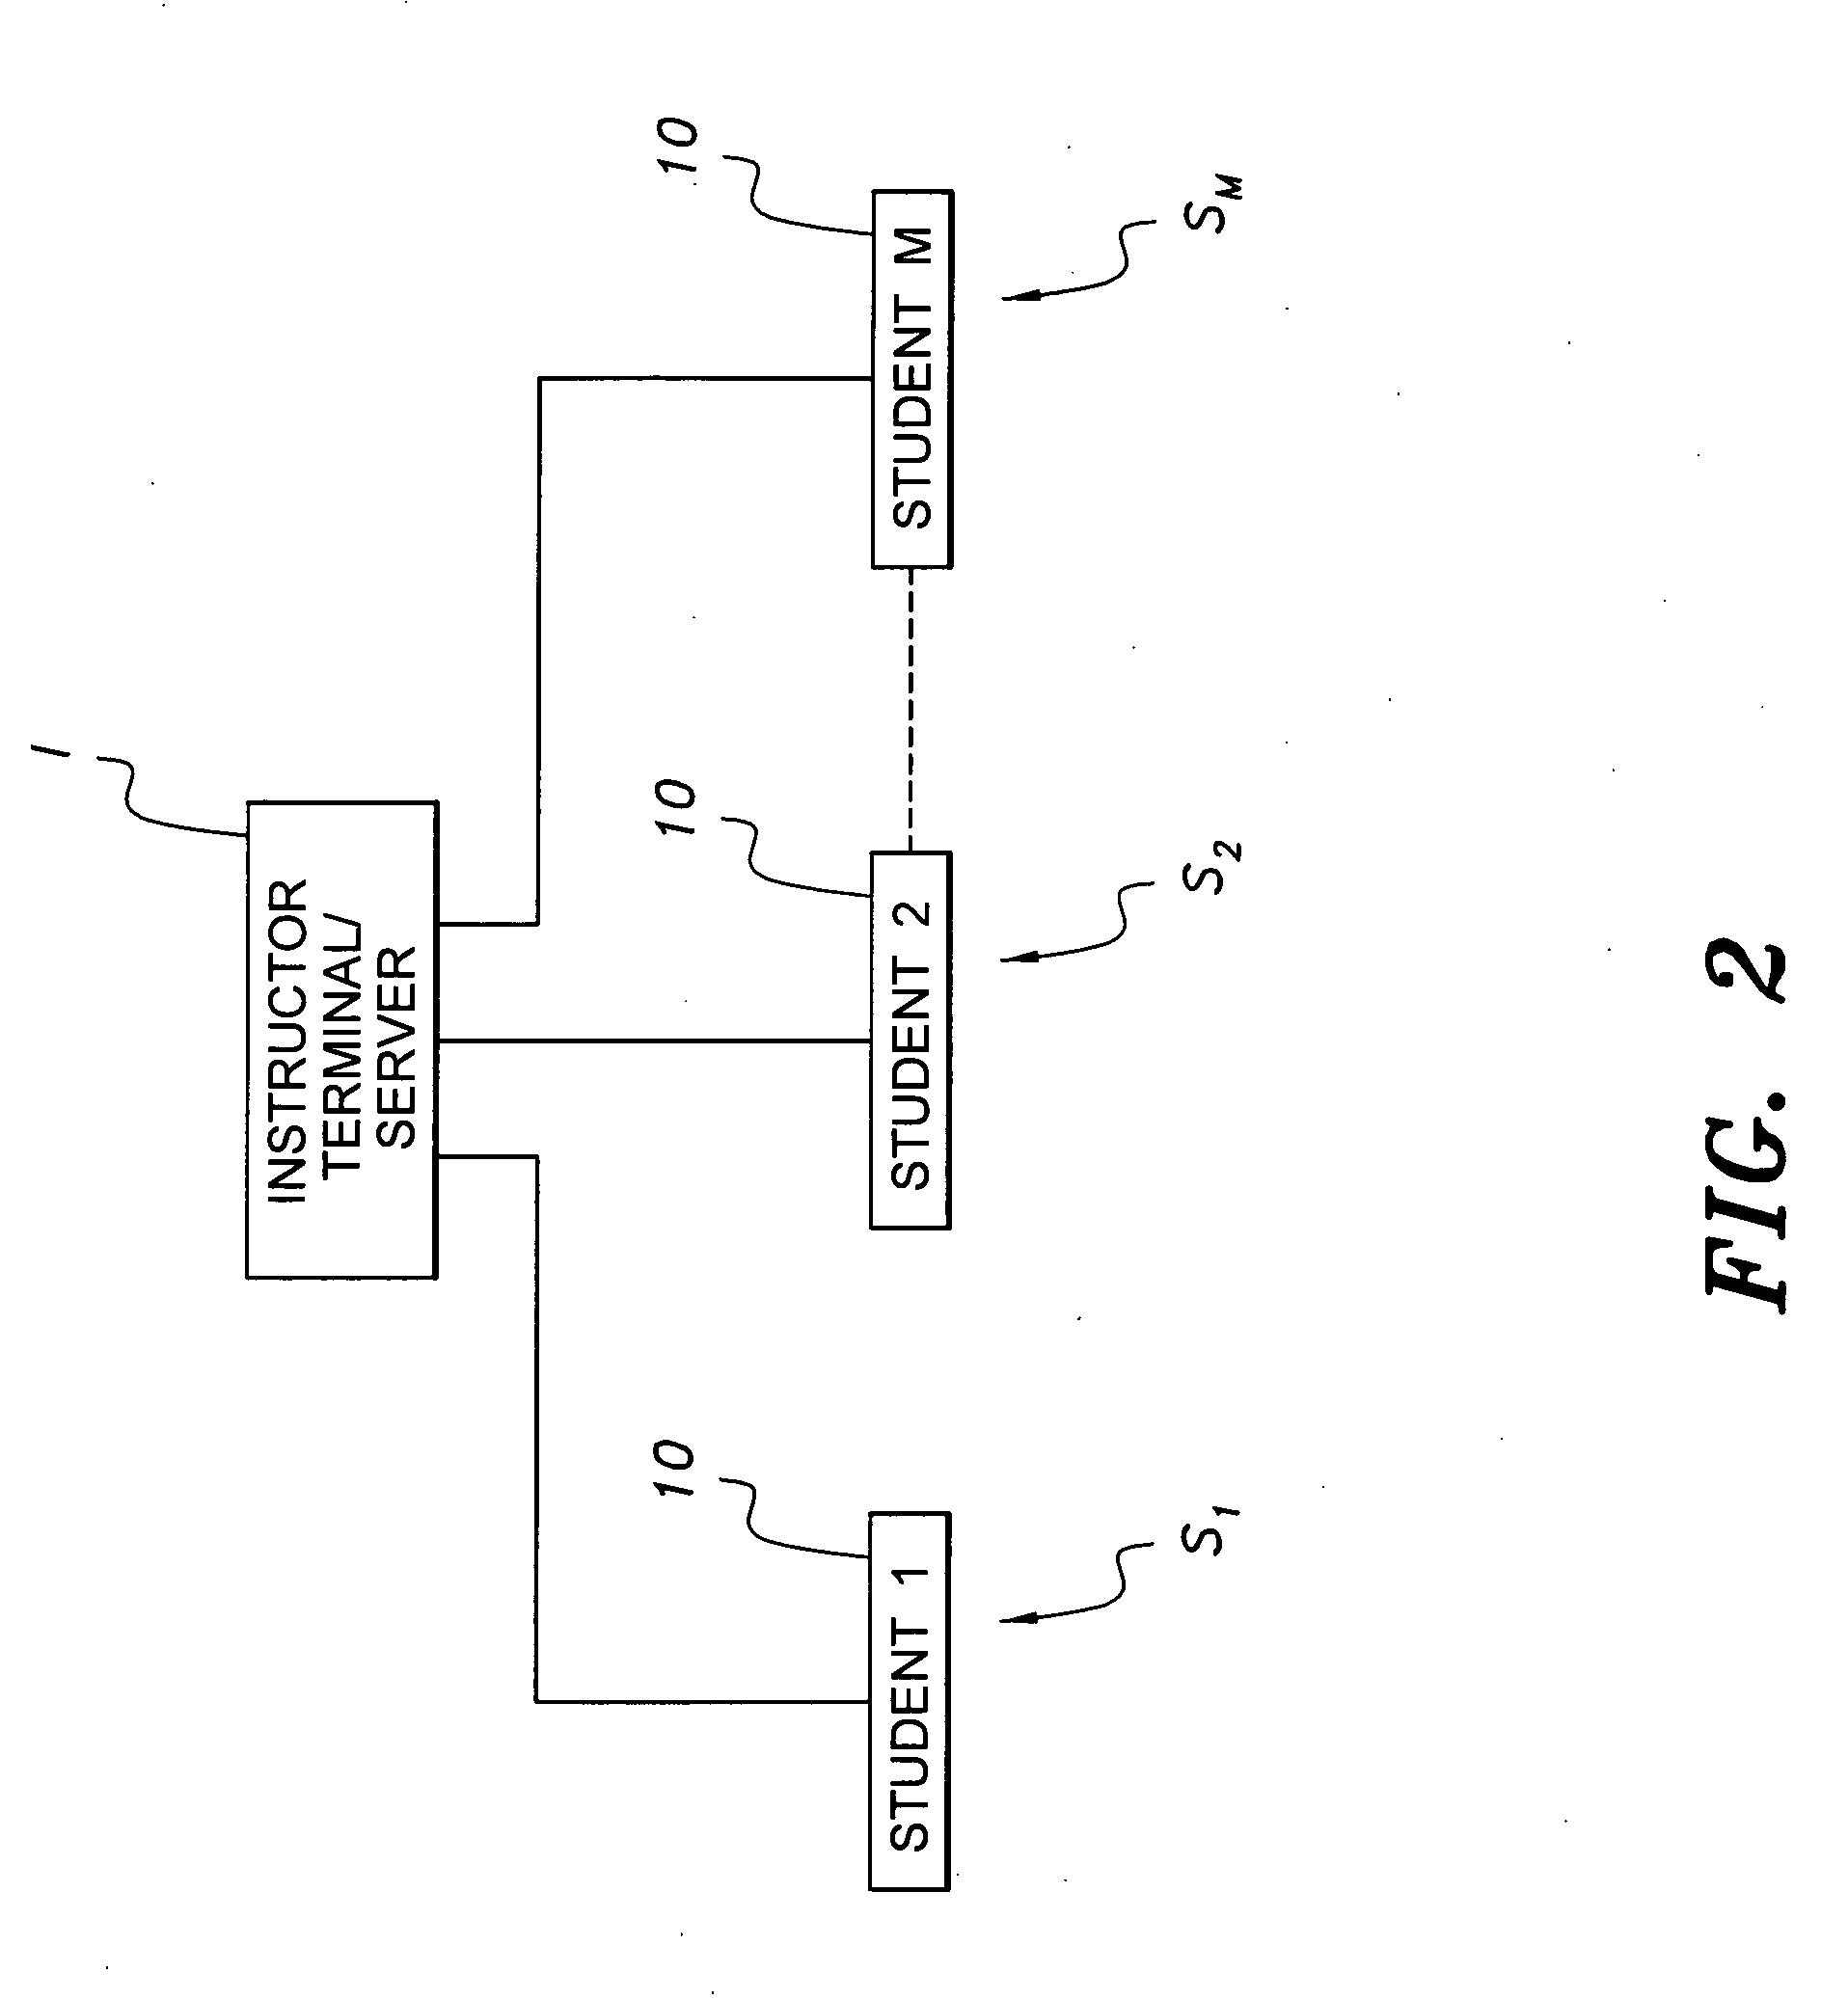 Educational system and method for testing memorization